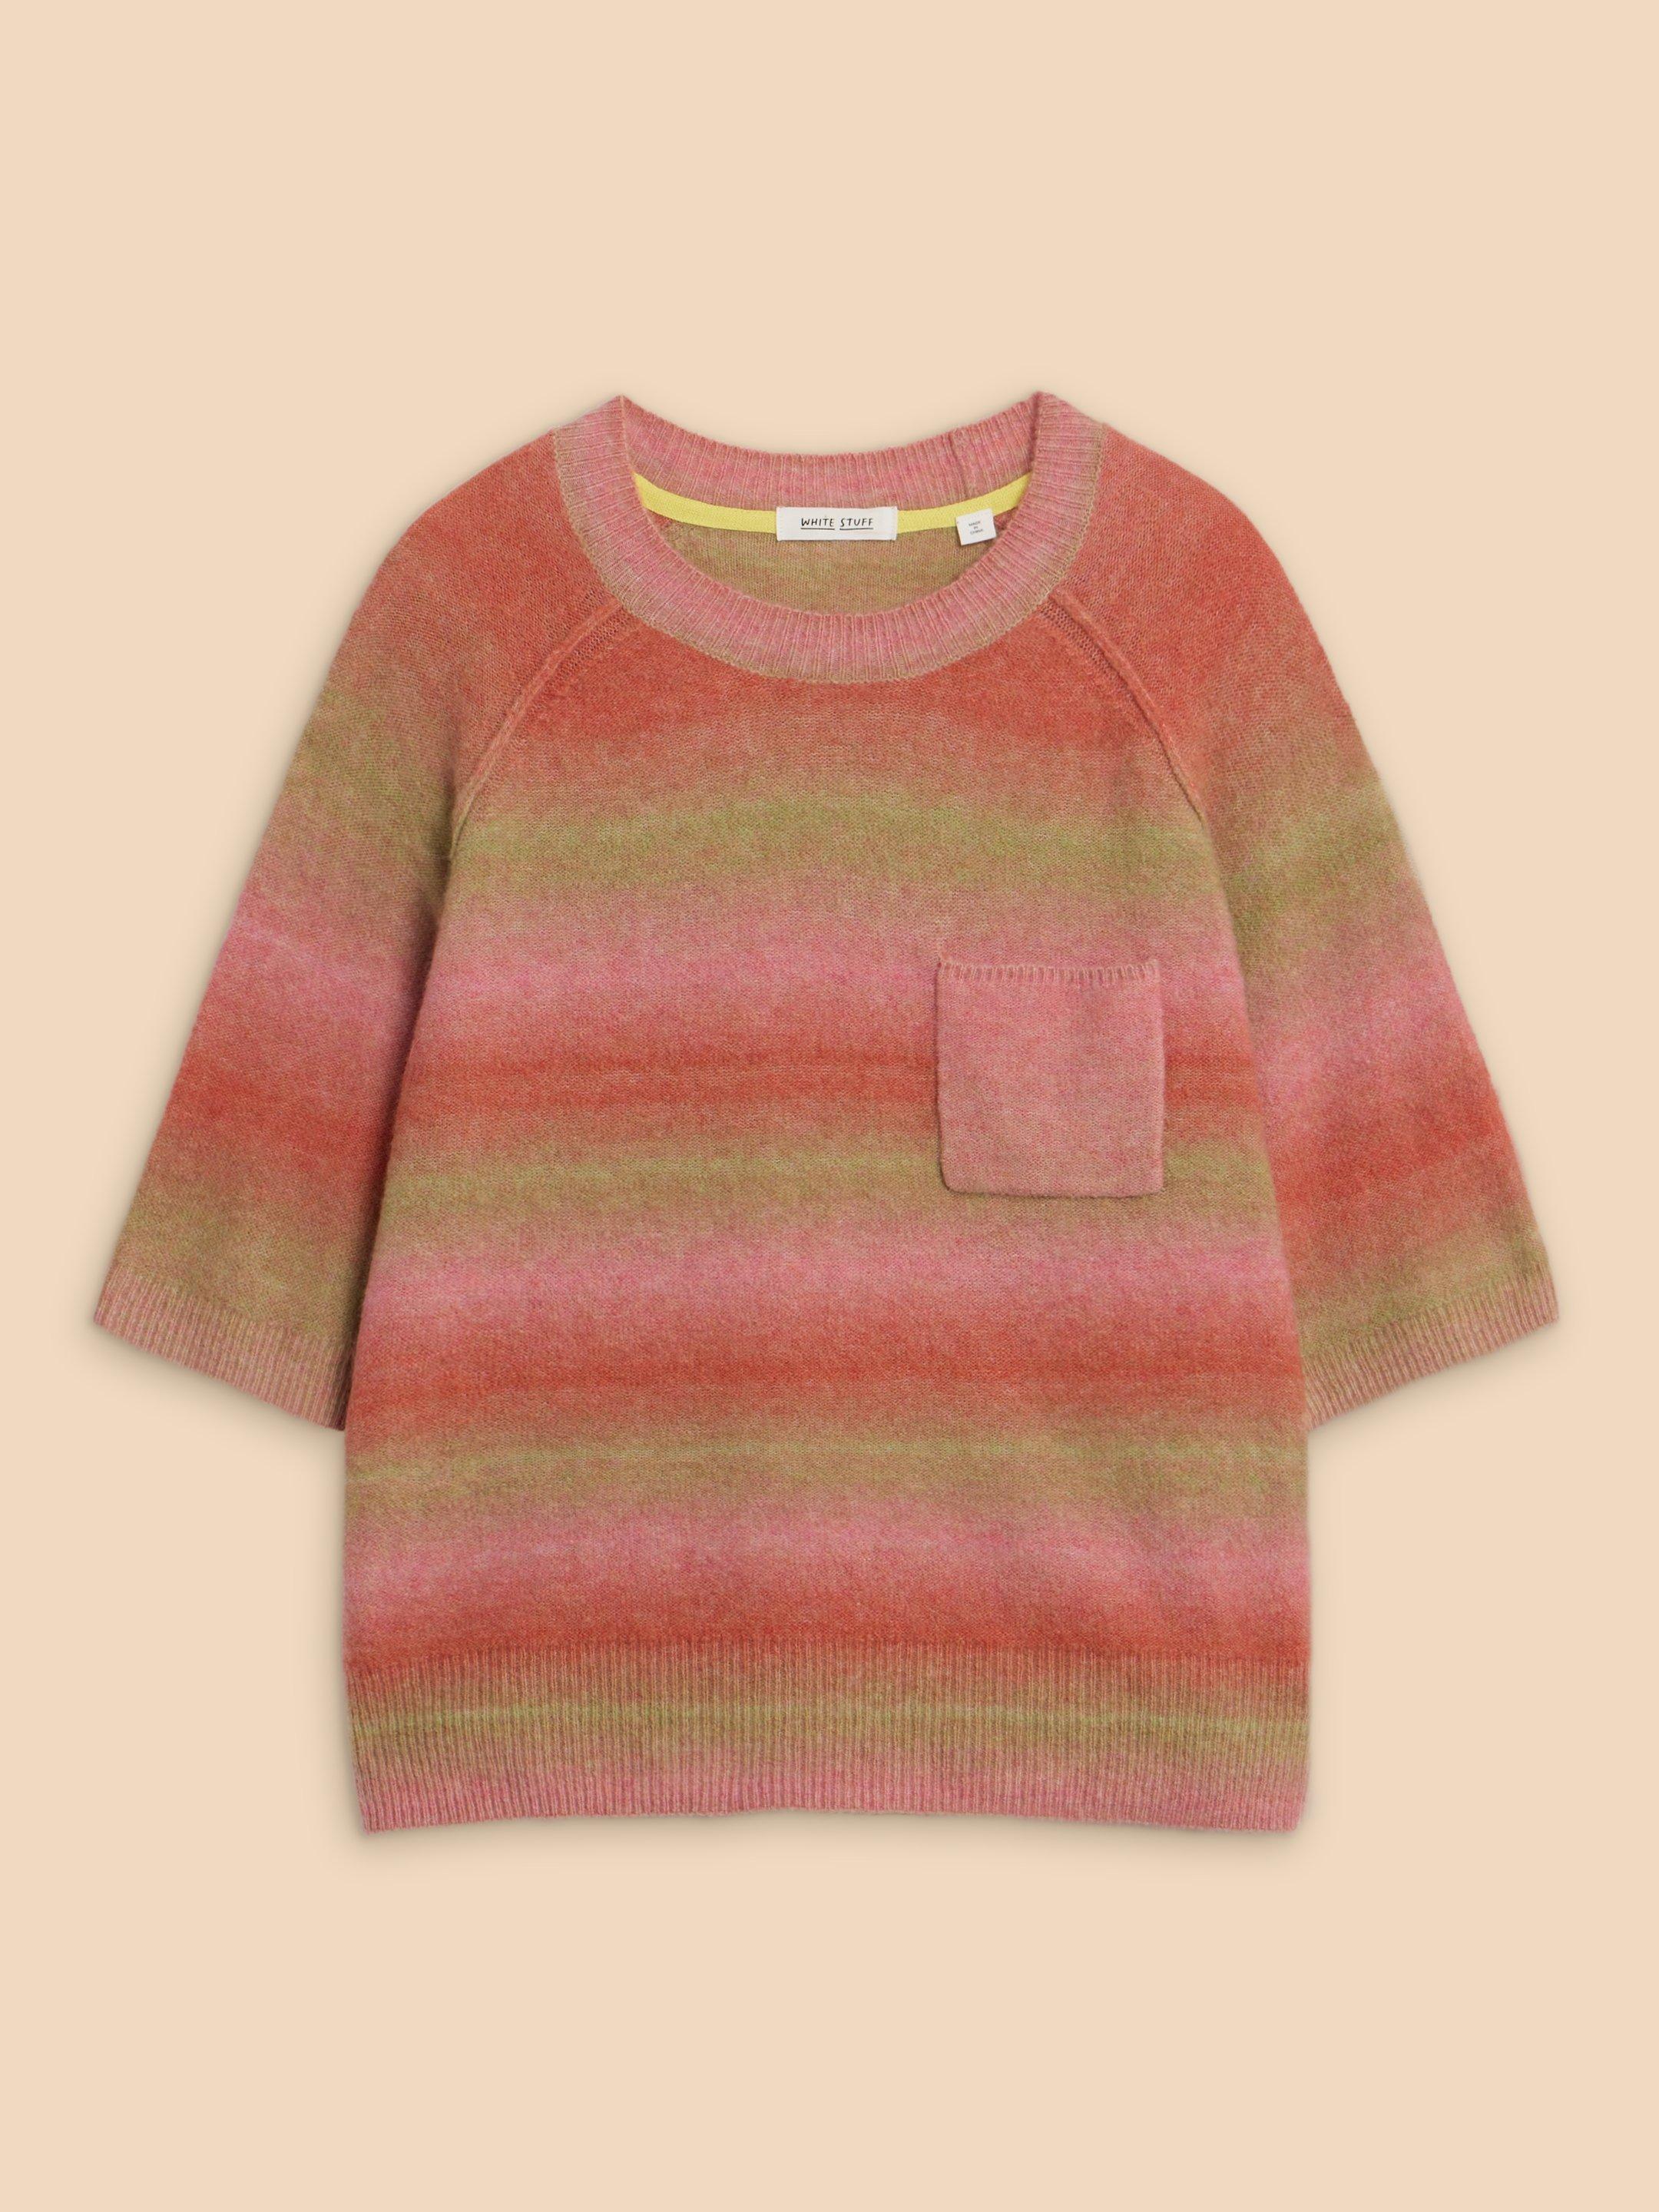 STELLA SPACEDYE KNITTED TEE in PINK MLT - FLAT FRONT